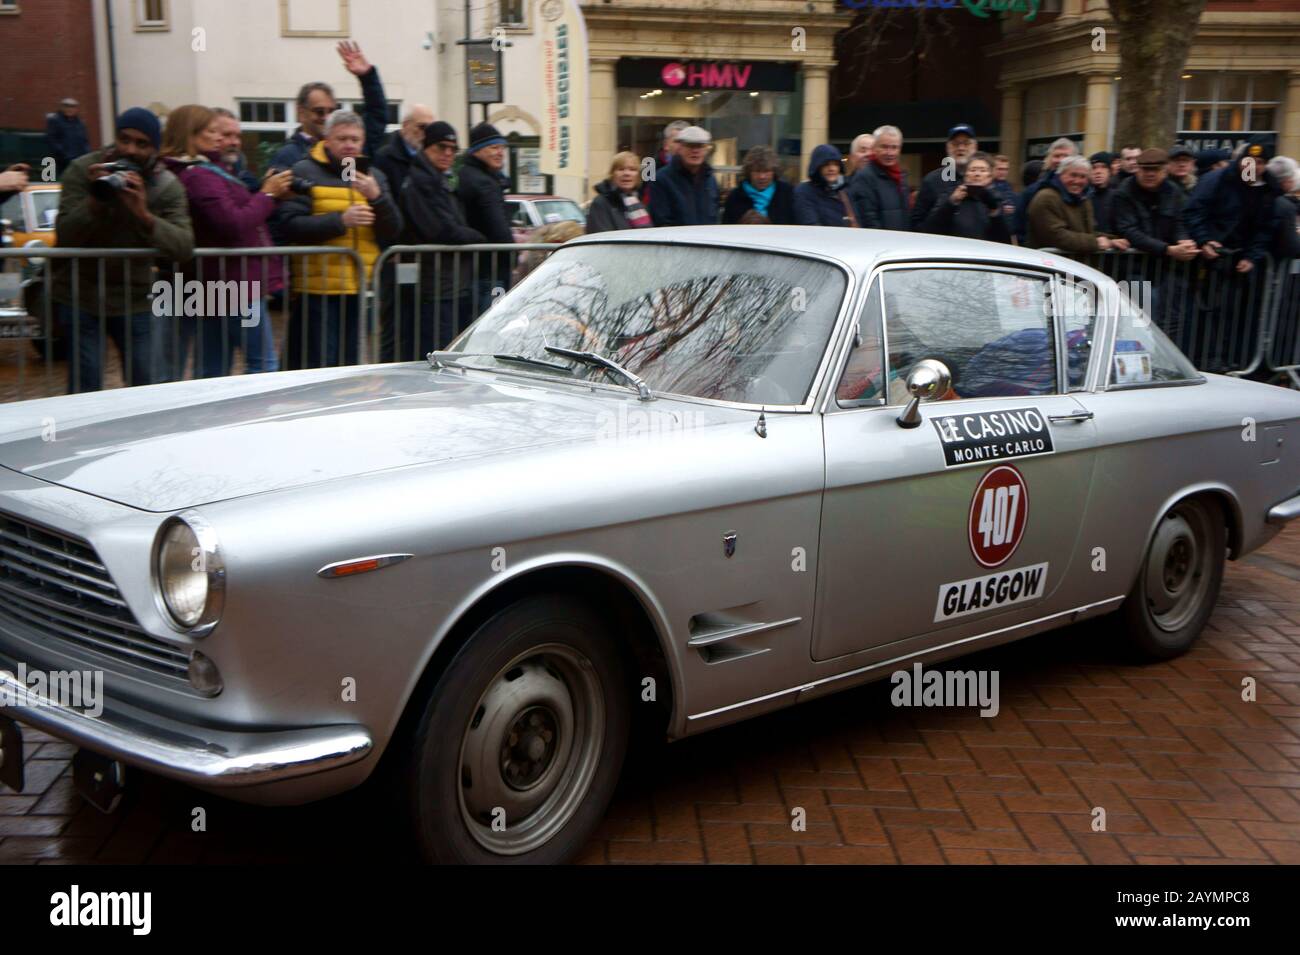 Car Number 407 leaving Passage Control in Banbury on the Rallye Monte-Carlo Historique Stock Photo